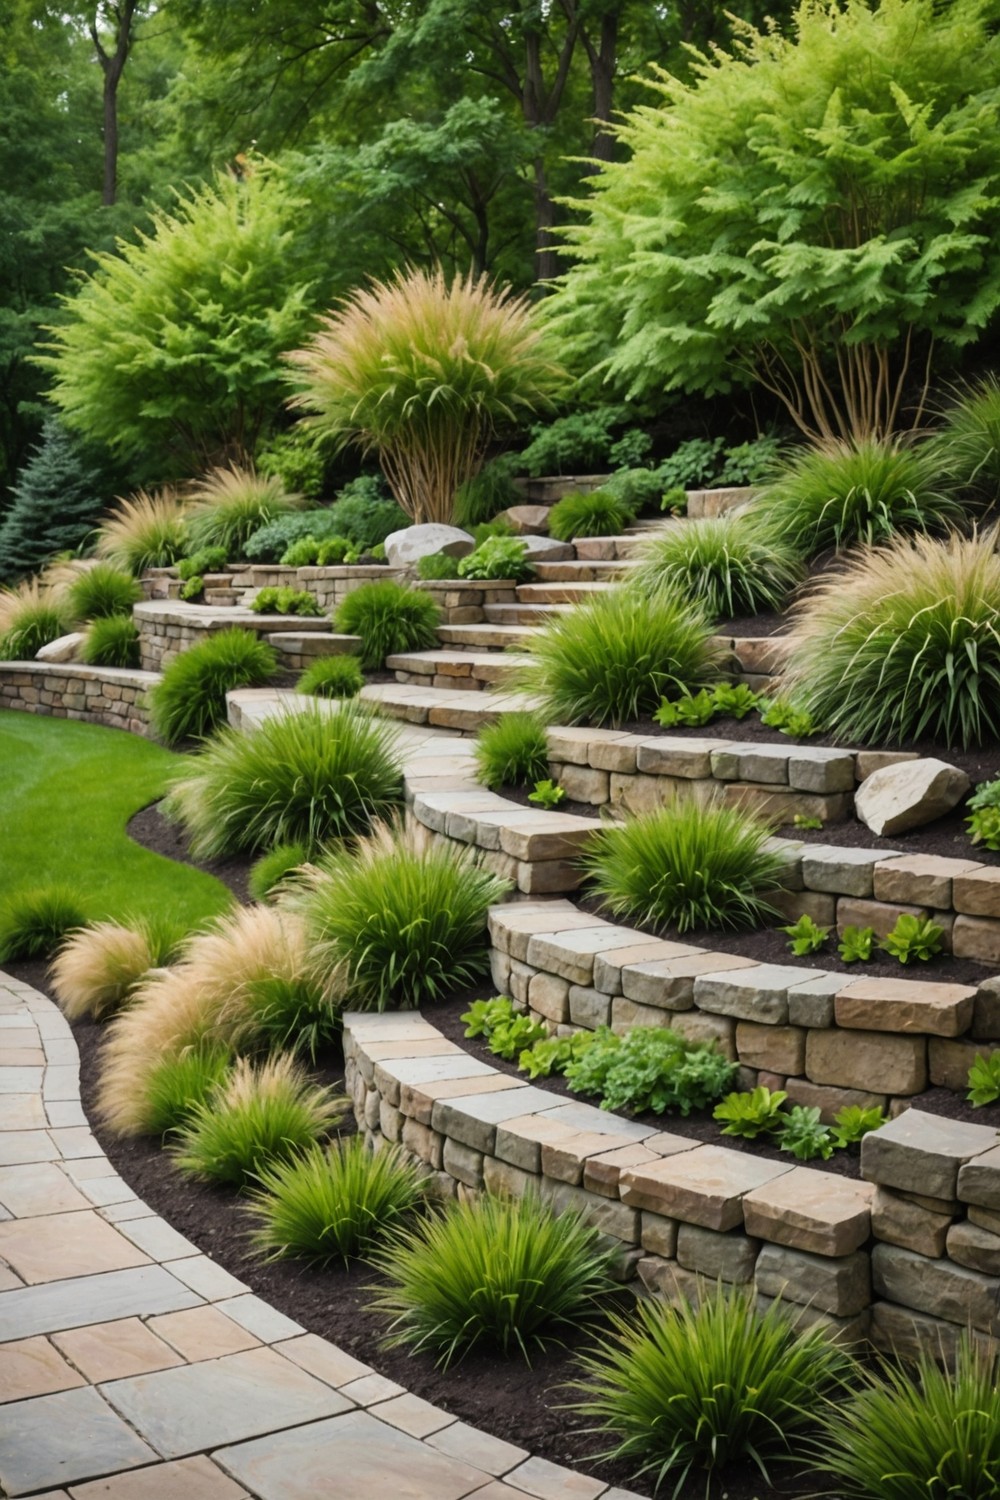 Tiered Retaining Wall with Ornamental Grasses